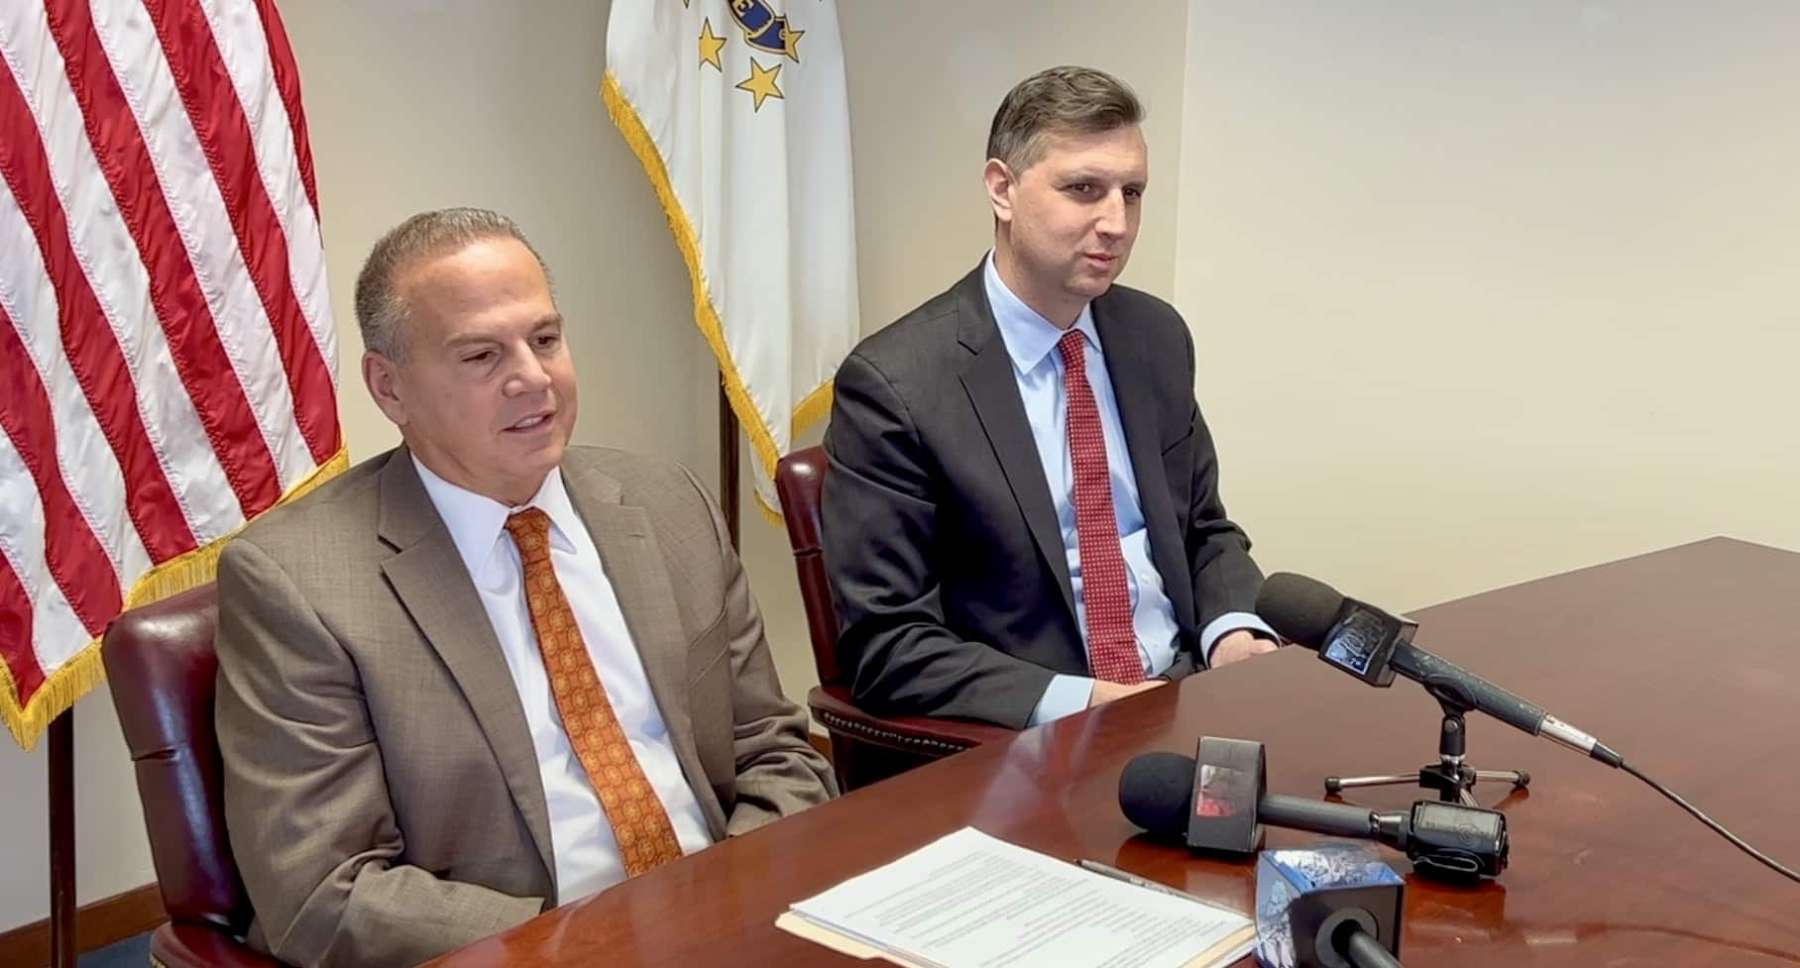 Rhode Island News: Reps Cicilline and Magaziner discuss first days in Republican-controlled House